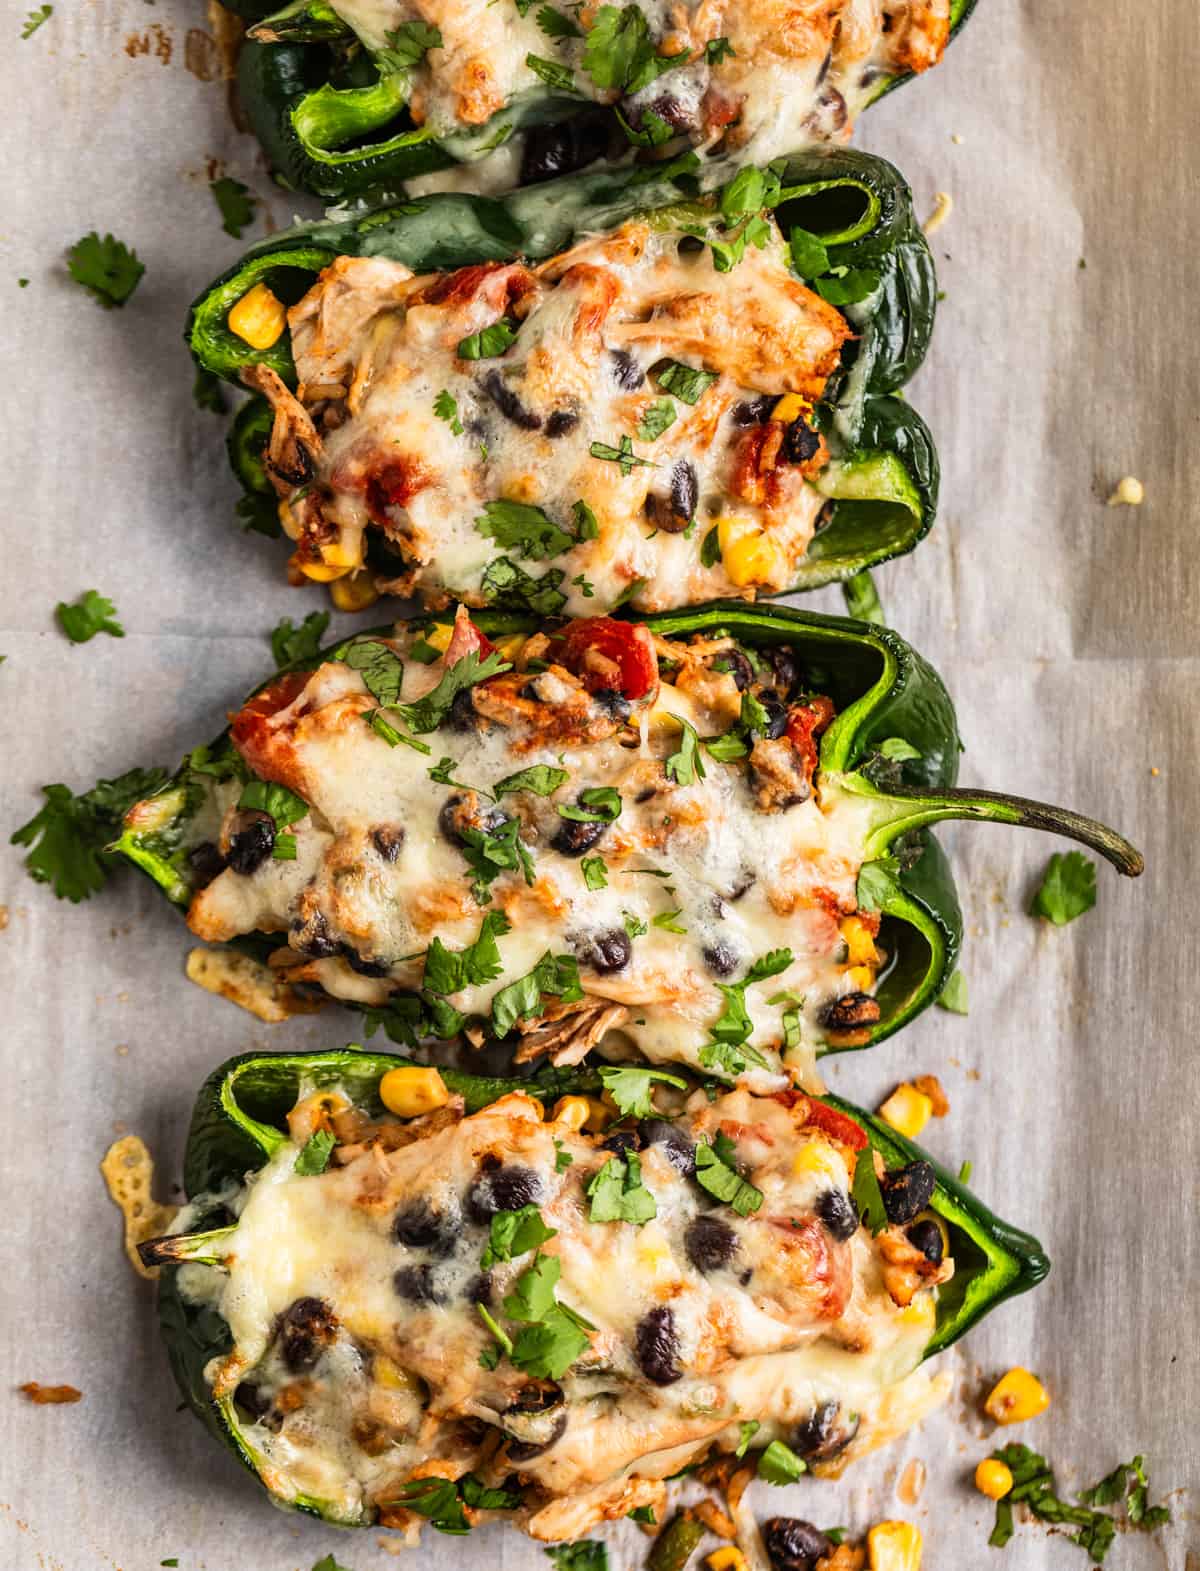 Chicken stuffed poblano peppers on parchment lined baking sheet topped with freshly chopped cilantro.